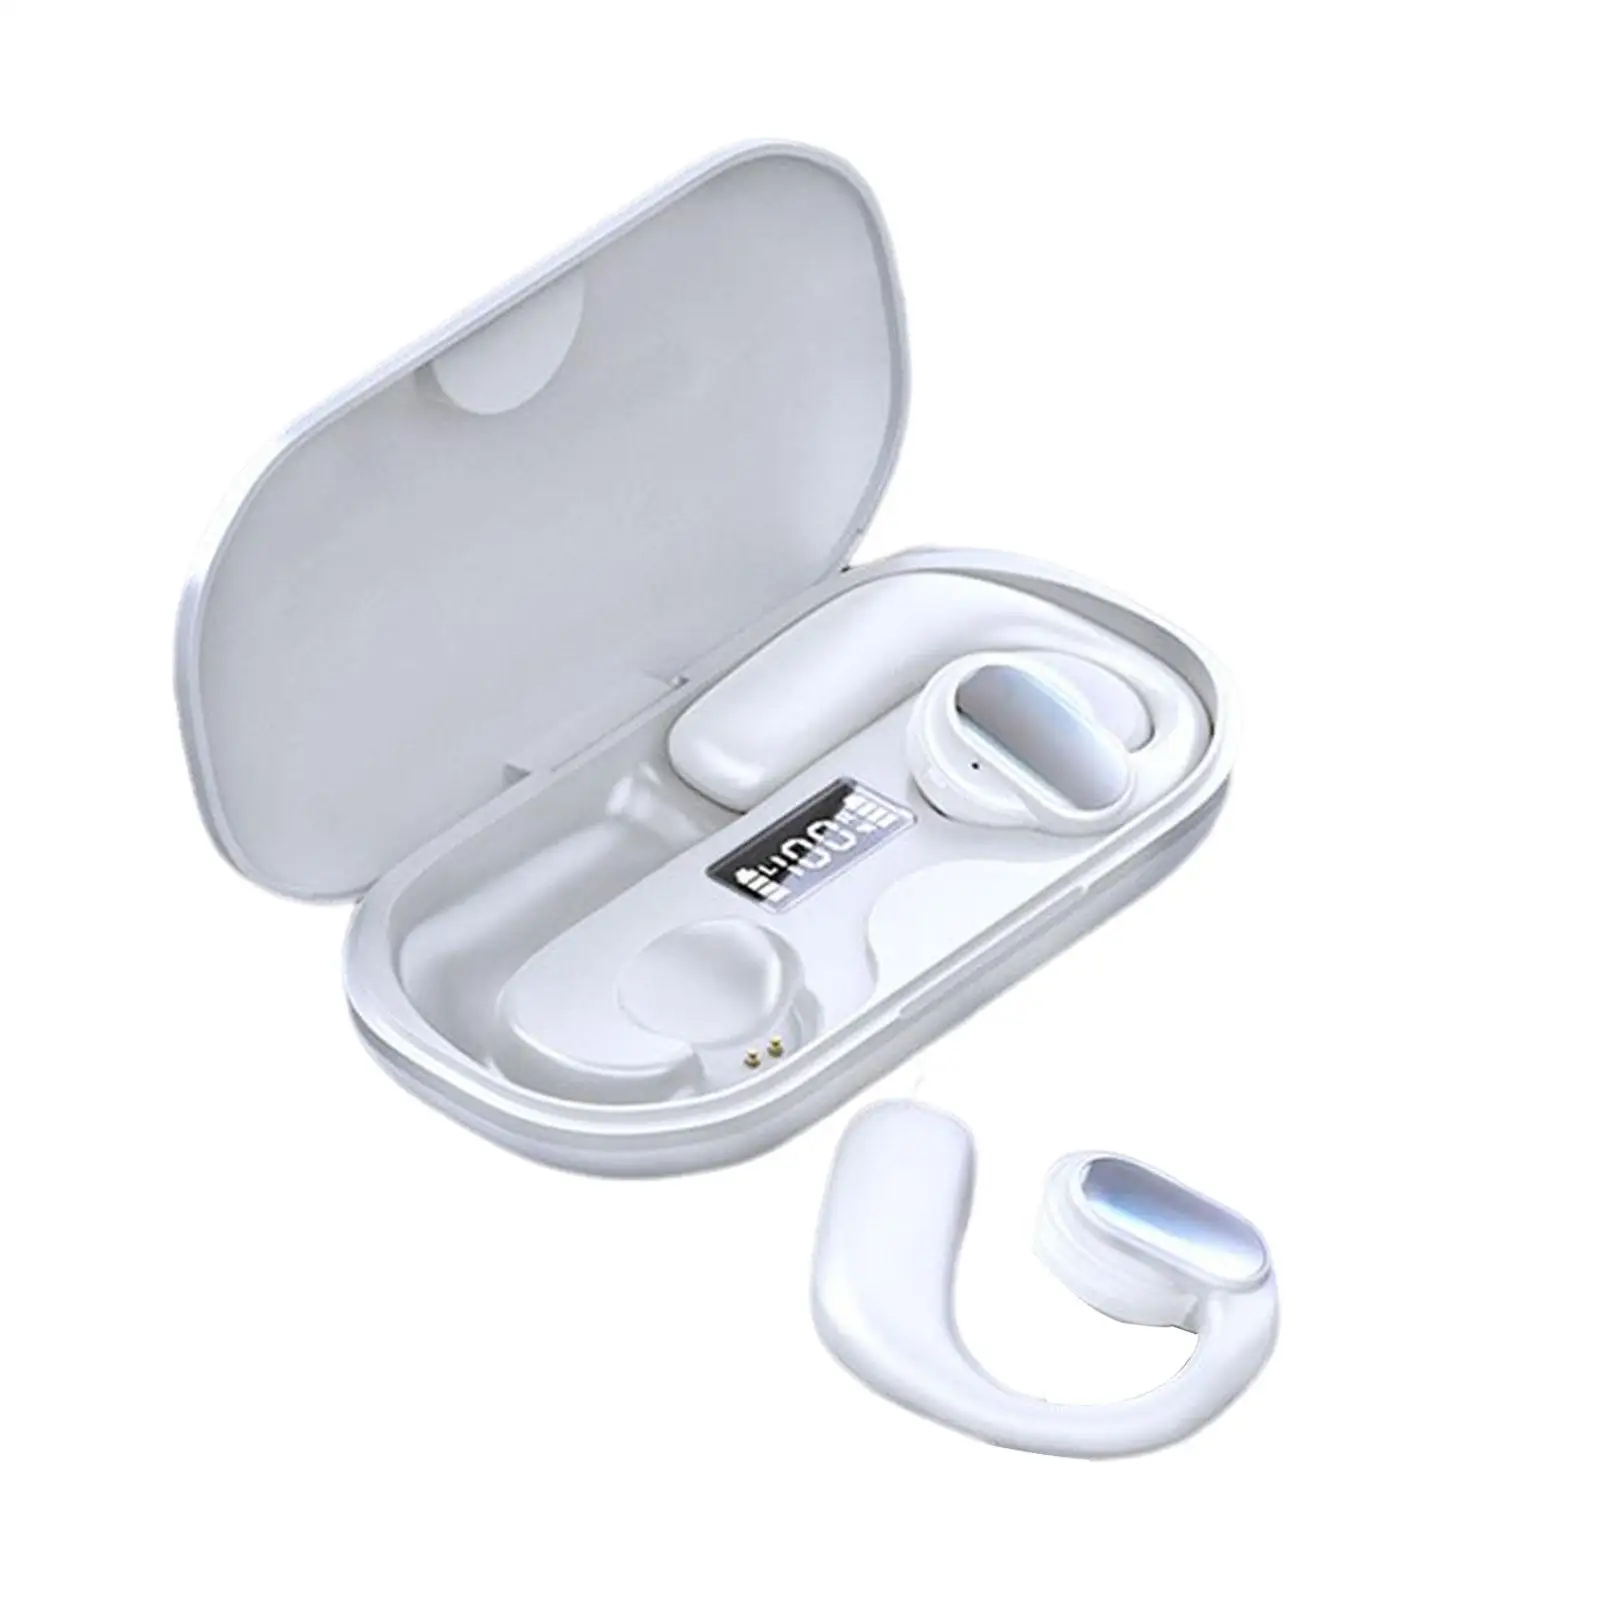 Air Conduction Headphone Ear Hook Earphones Handsfree Calling with Charging Case Noise Cancelling Headset for Working Travel Gym